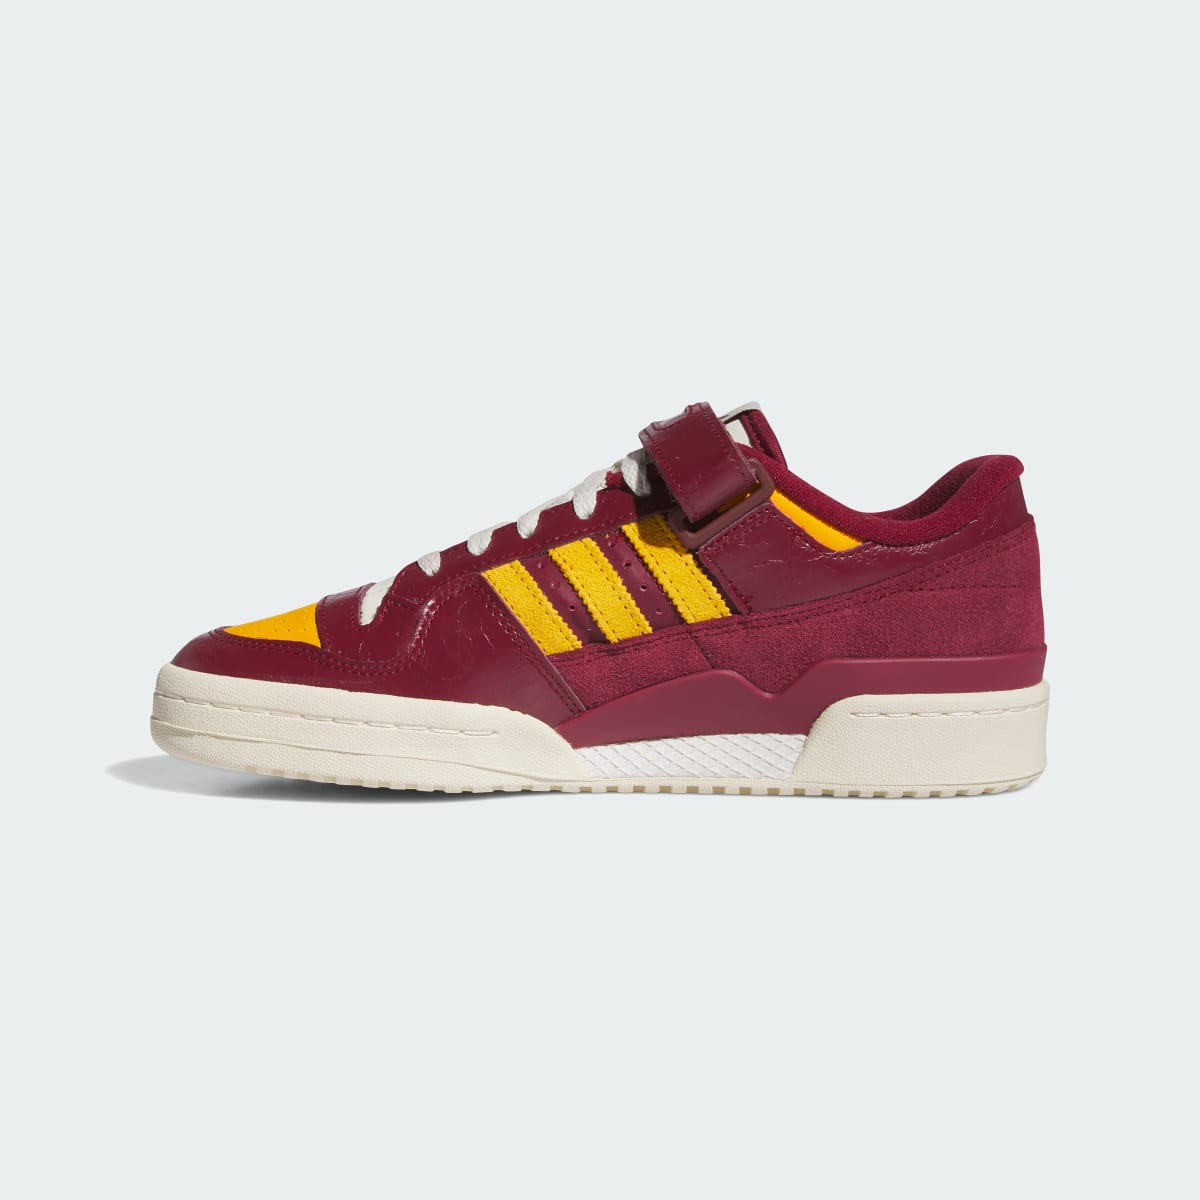 Adidas Forum 84 Low Shoes. 7